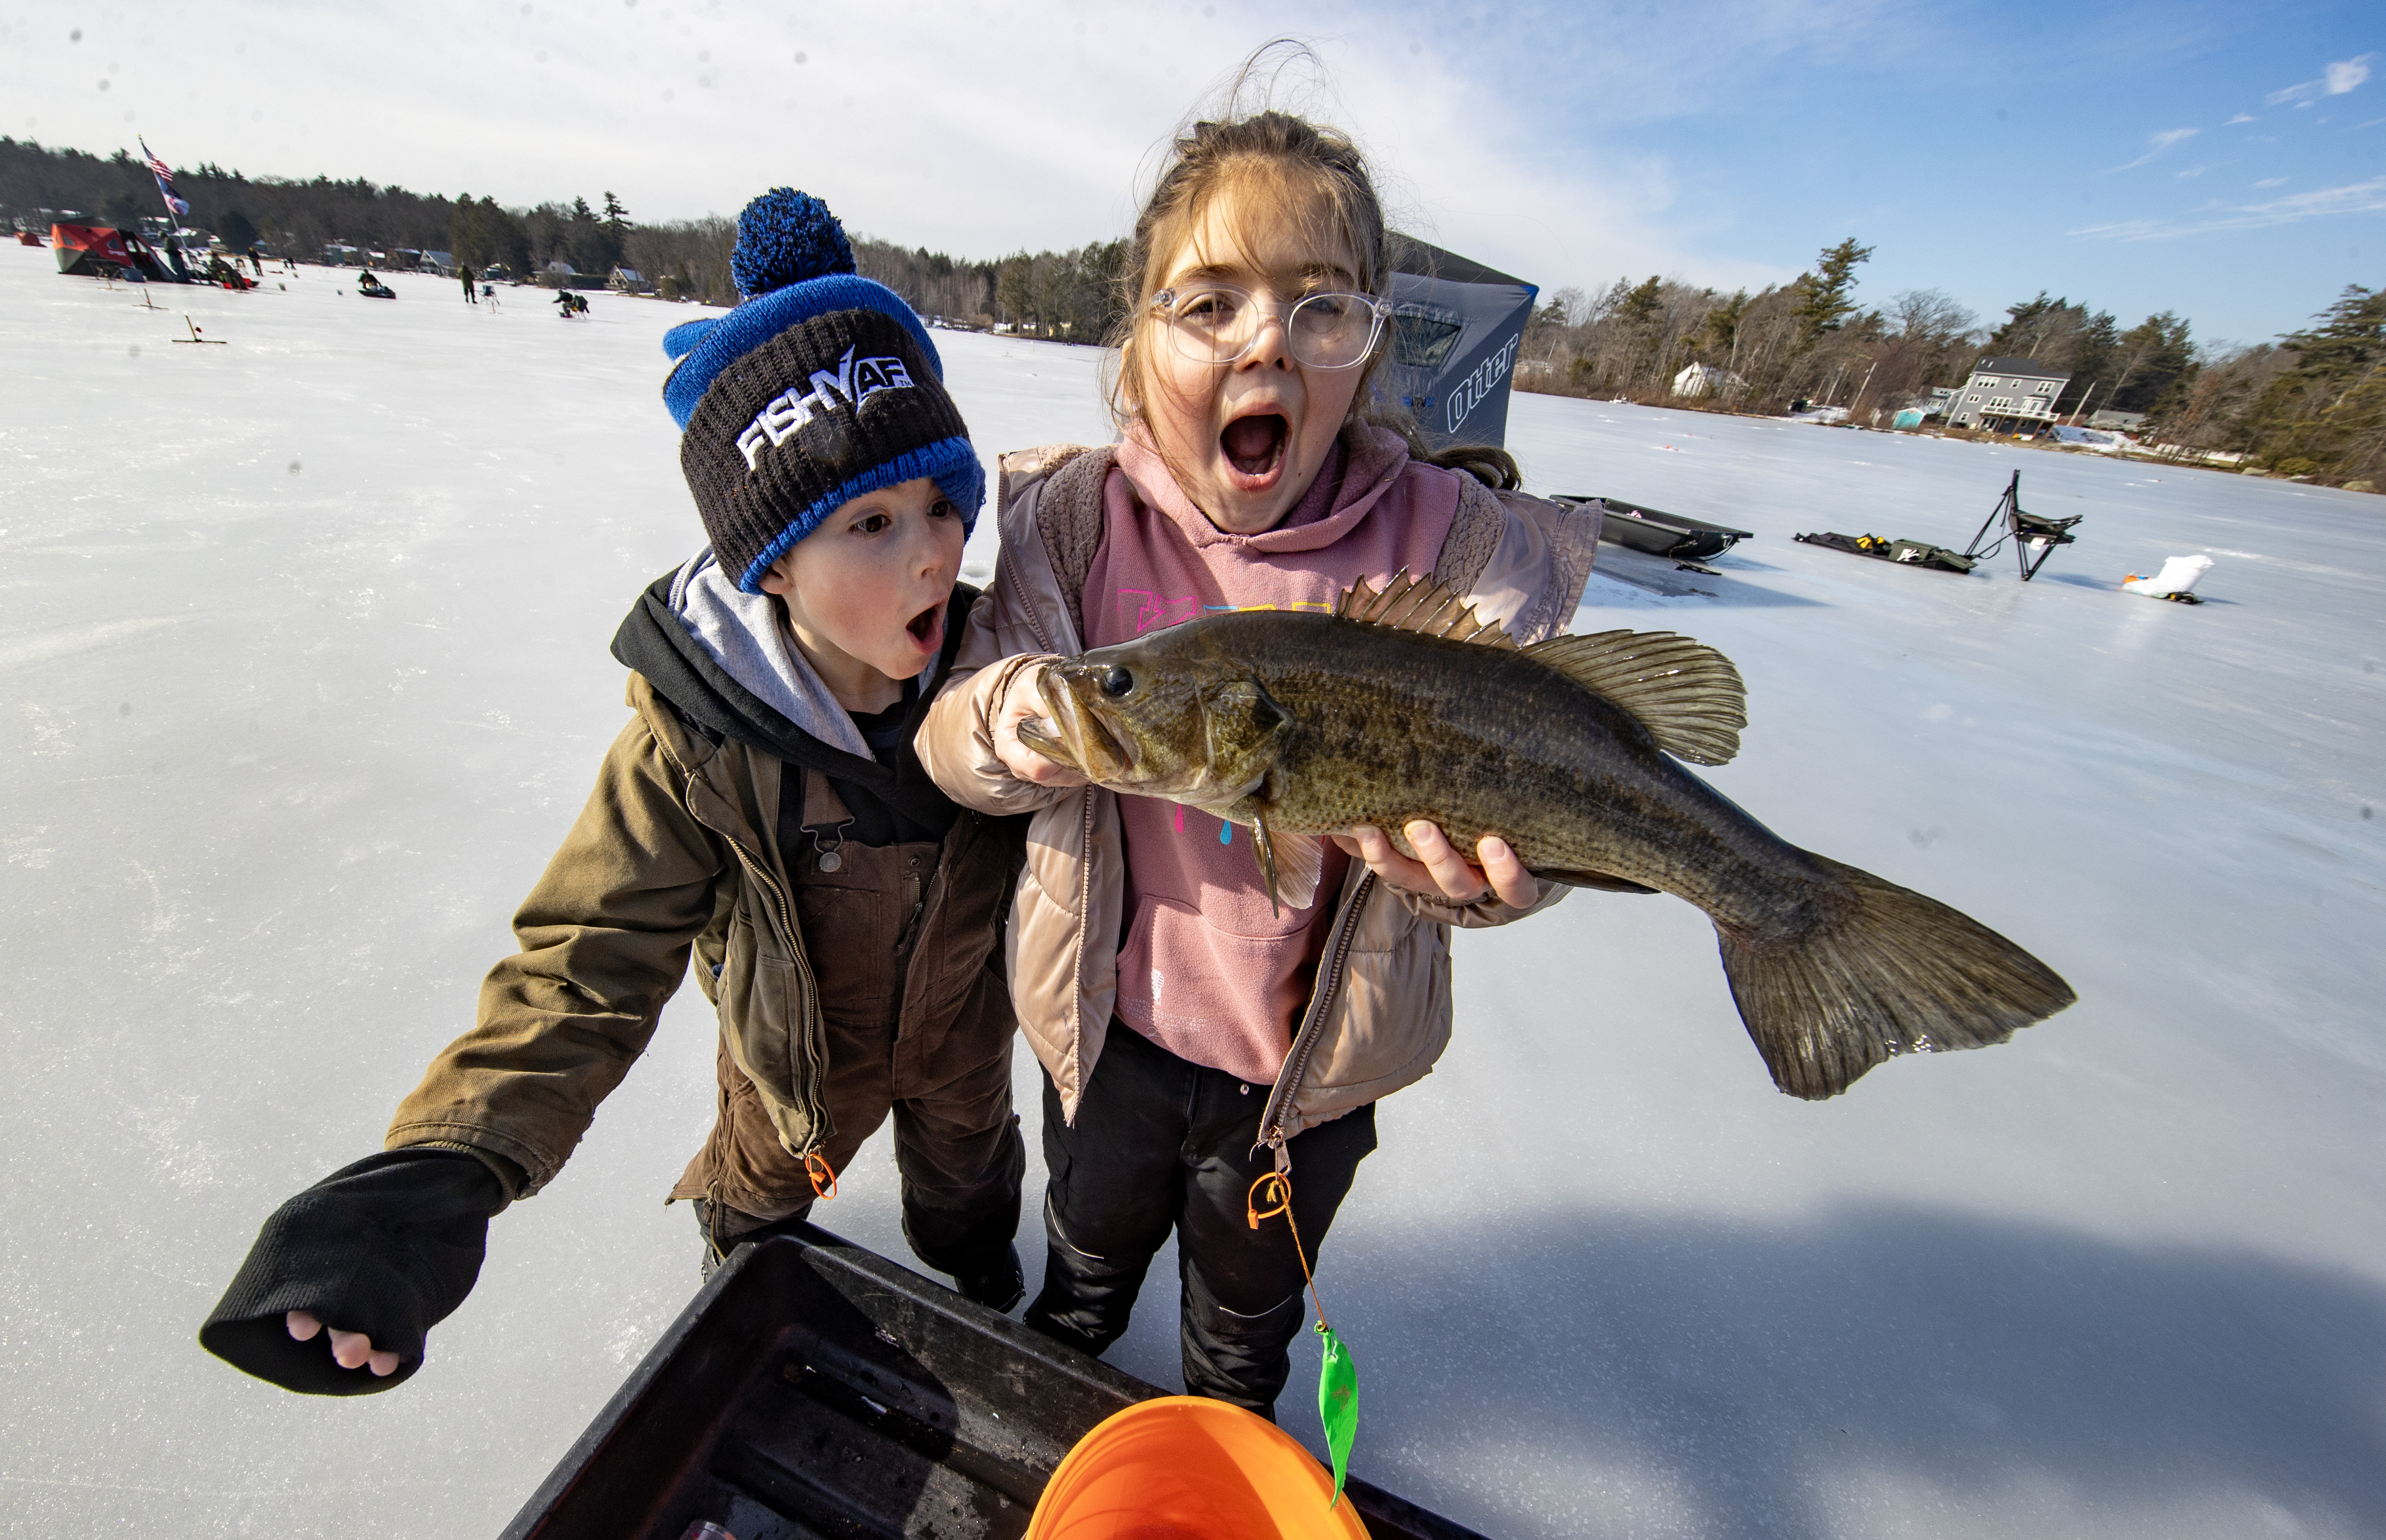 February fishing on the thin ice of a new world - The Boston Globe